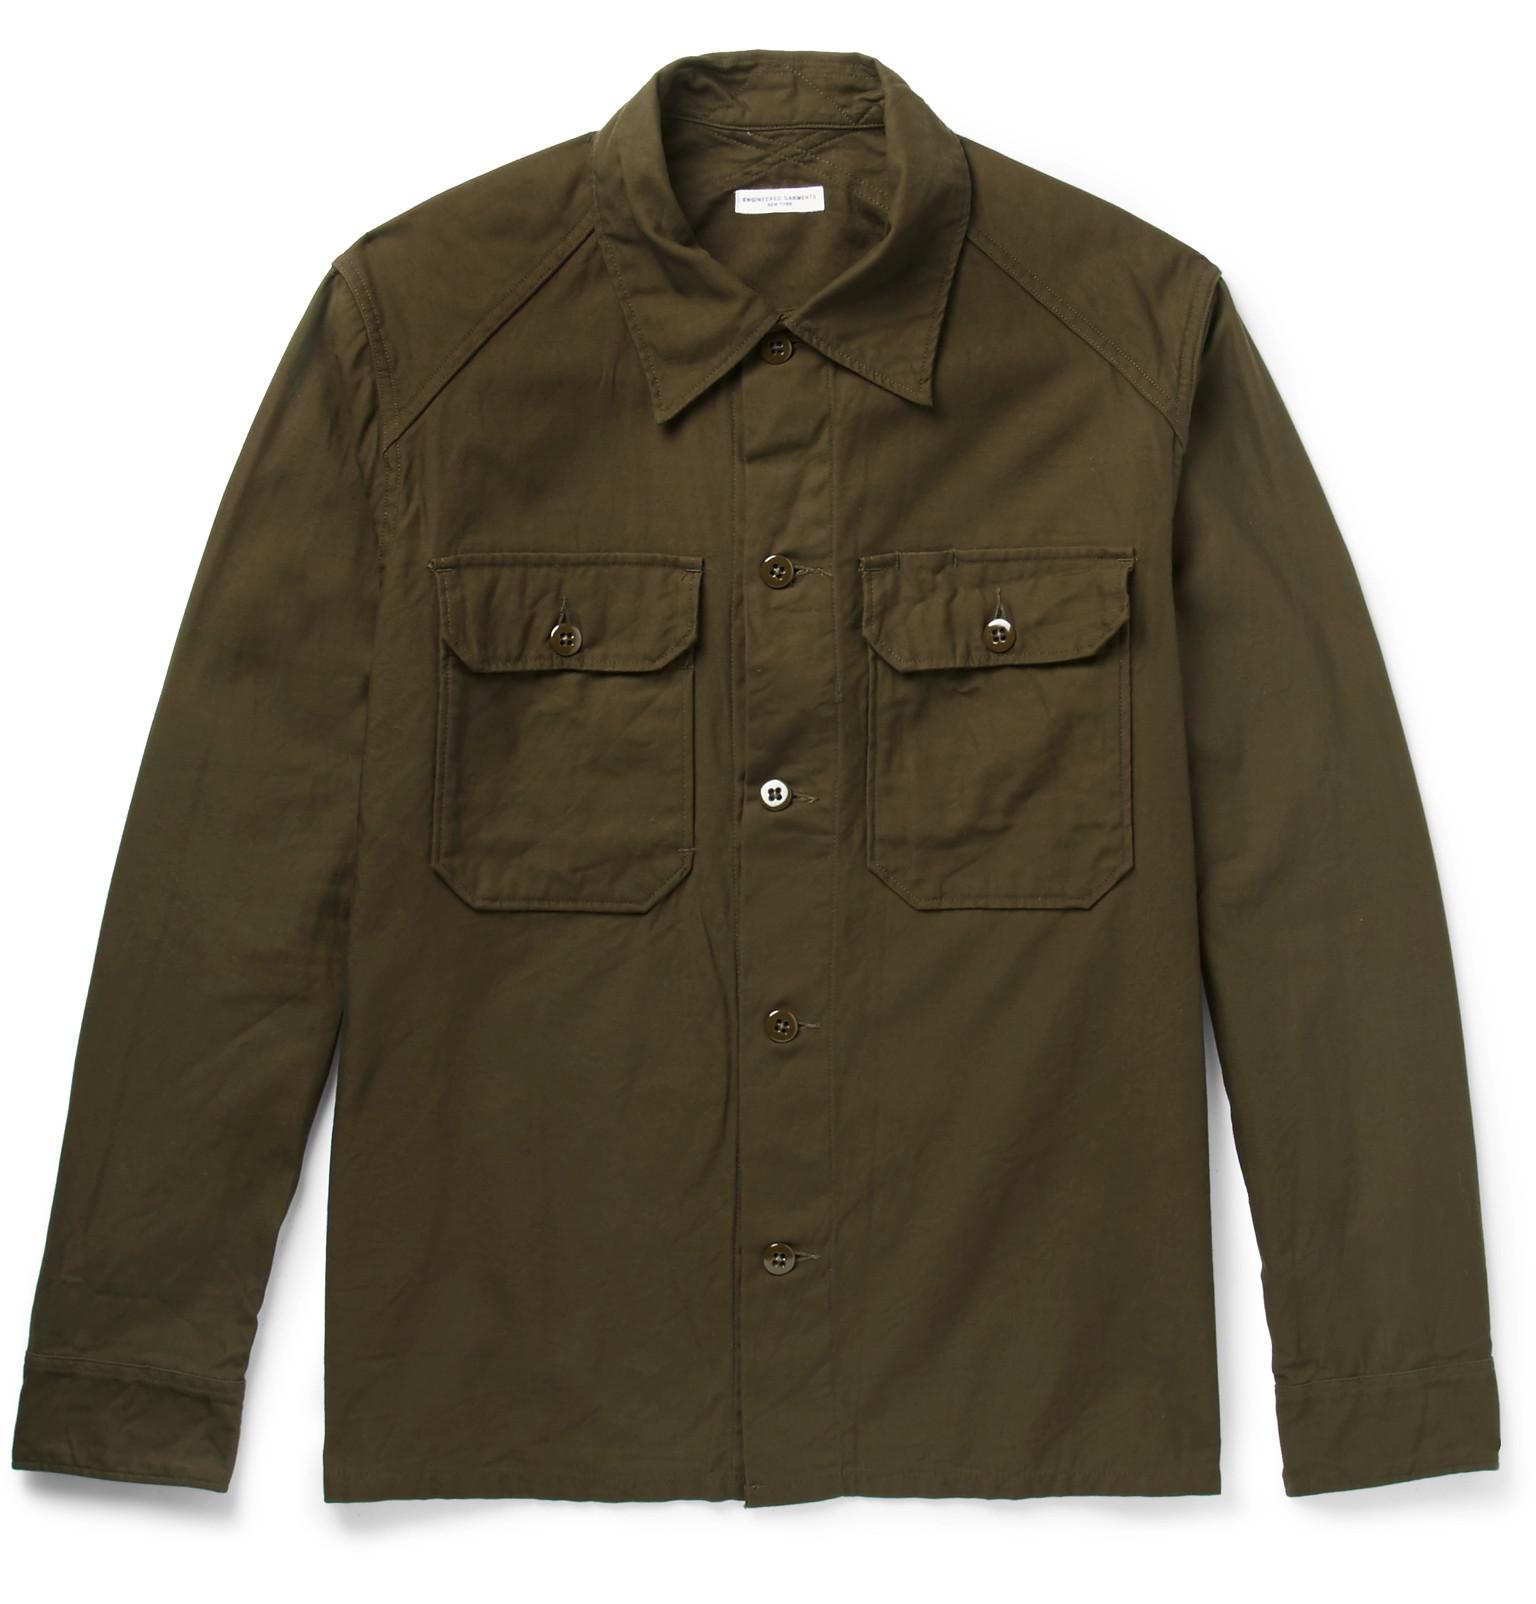 Engineered Garments Cotton-twill Field Overshirt in Green for Men - Lyst